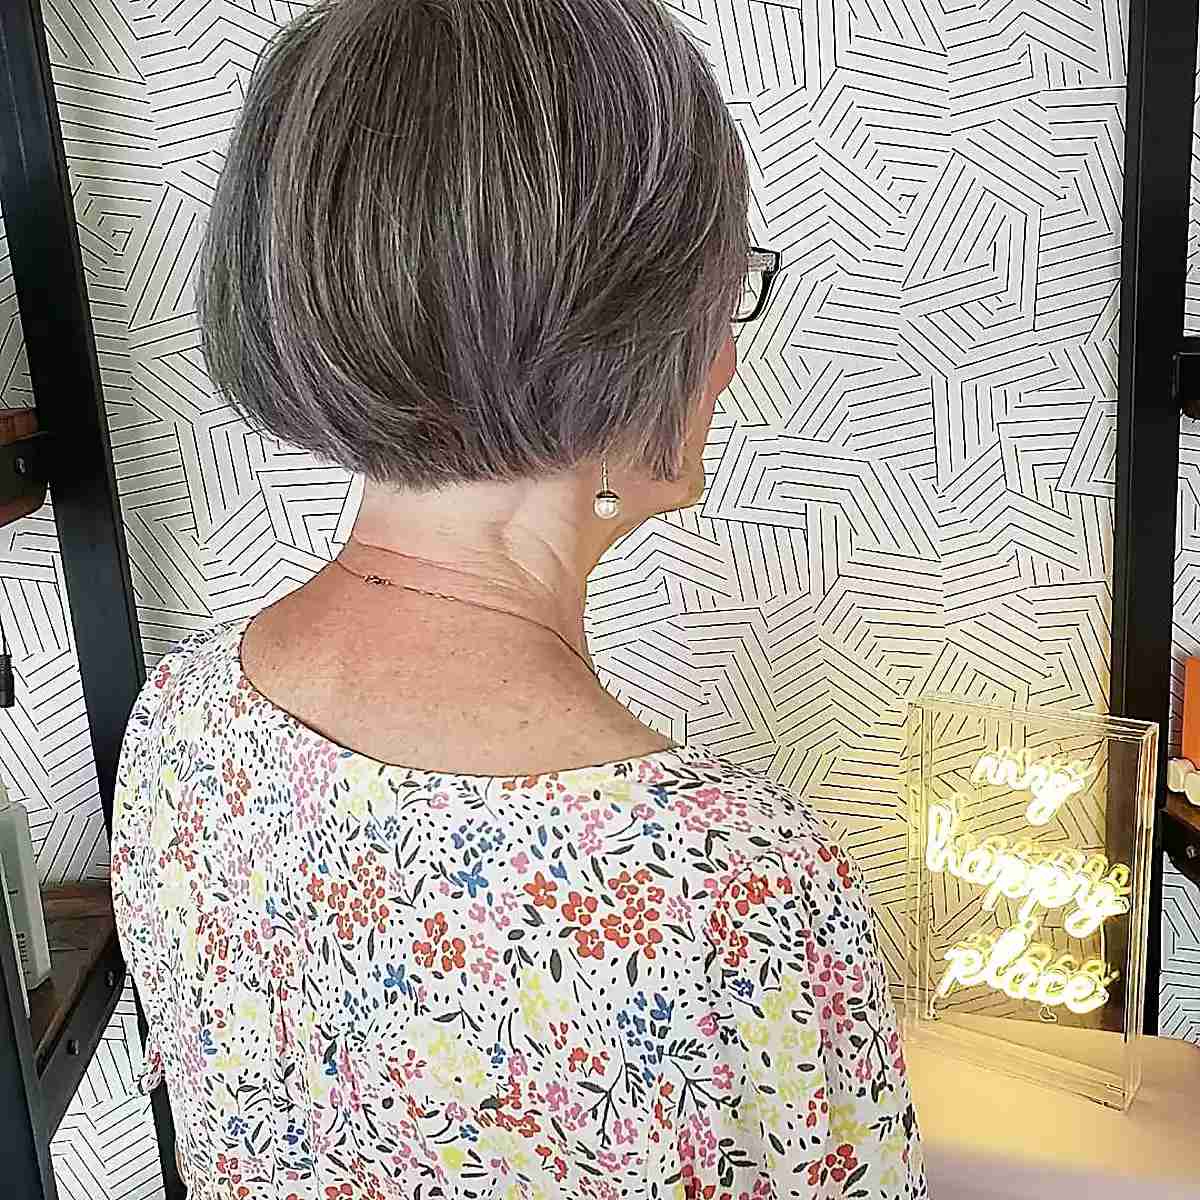 Short Mini Bob with Eye-Length Bangs for Gray Hair with Specs for 50-Year-Olds